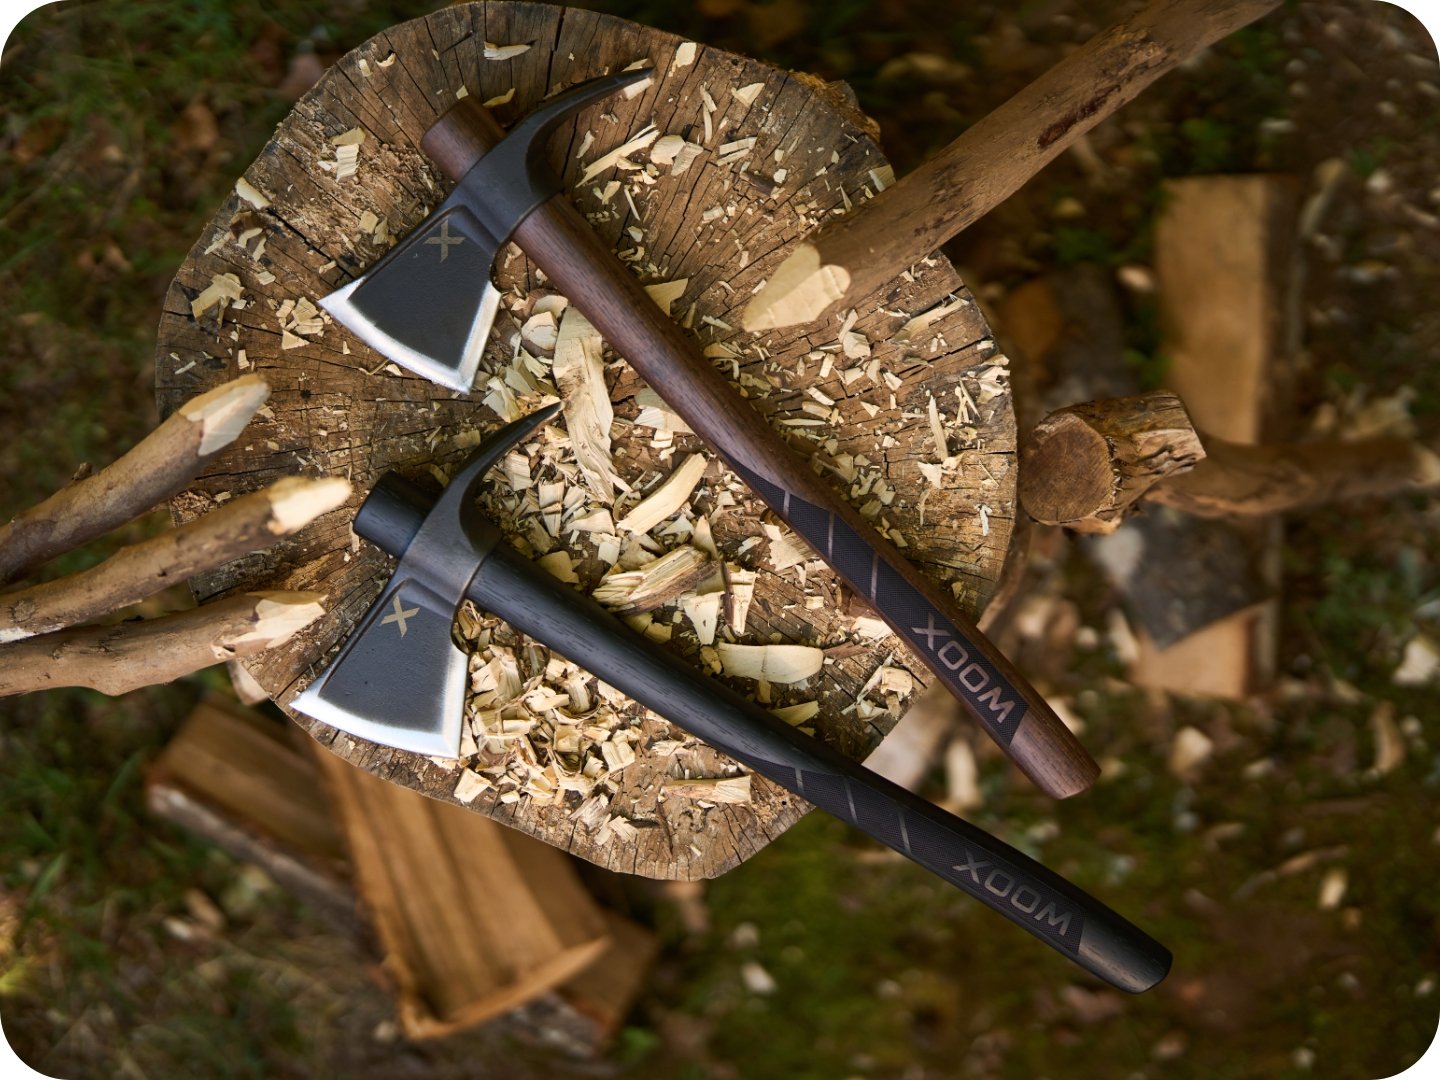 WOOX INTRODUCES NEW SOLO BACKCOUNTRY AXE - WOOX